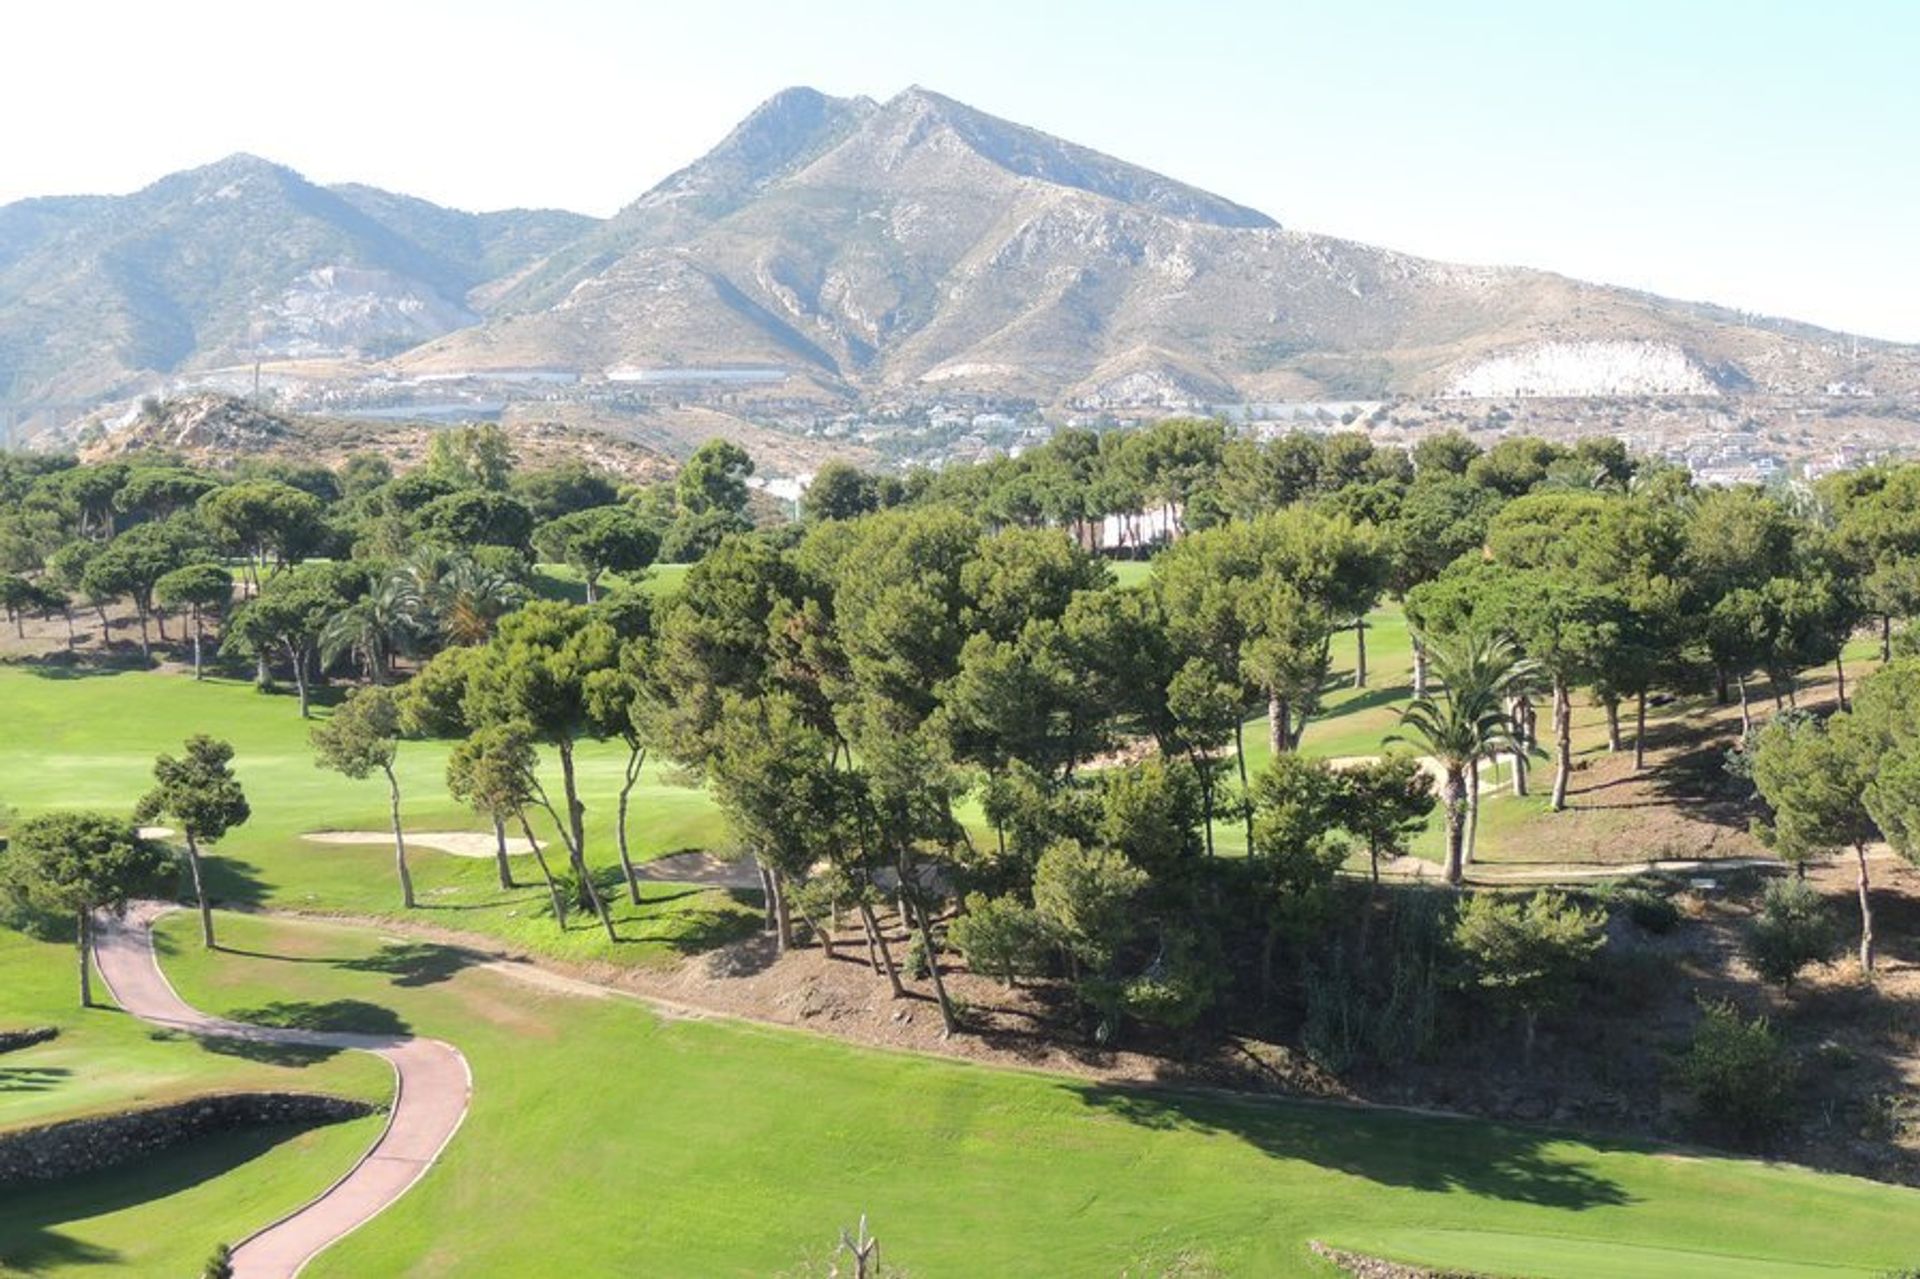 Practice your swing at one of the many golf courses in and around Torrequebrada